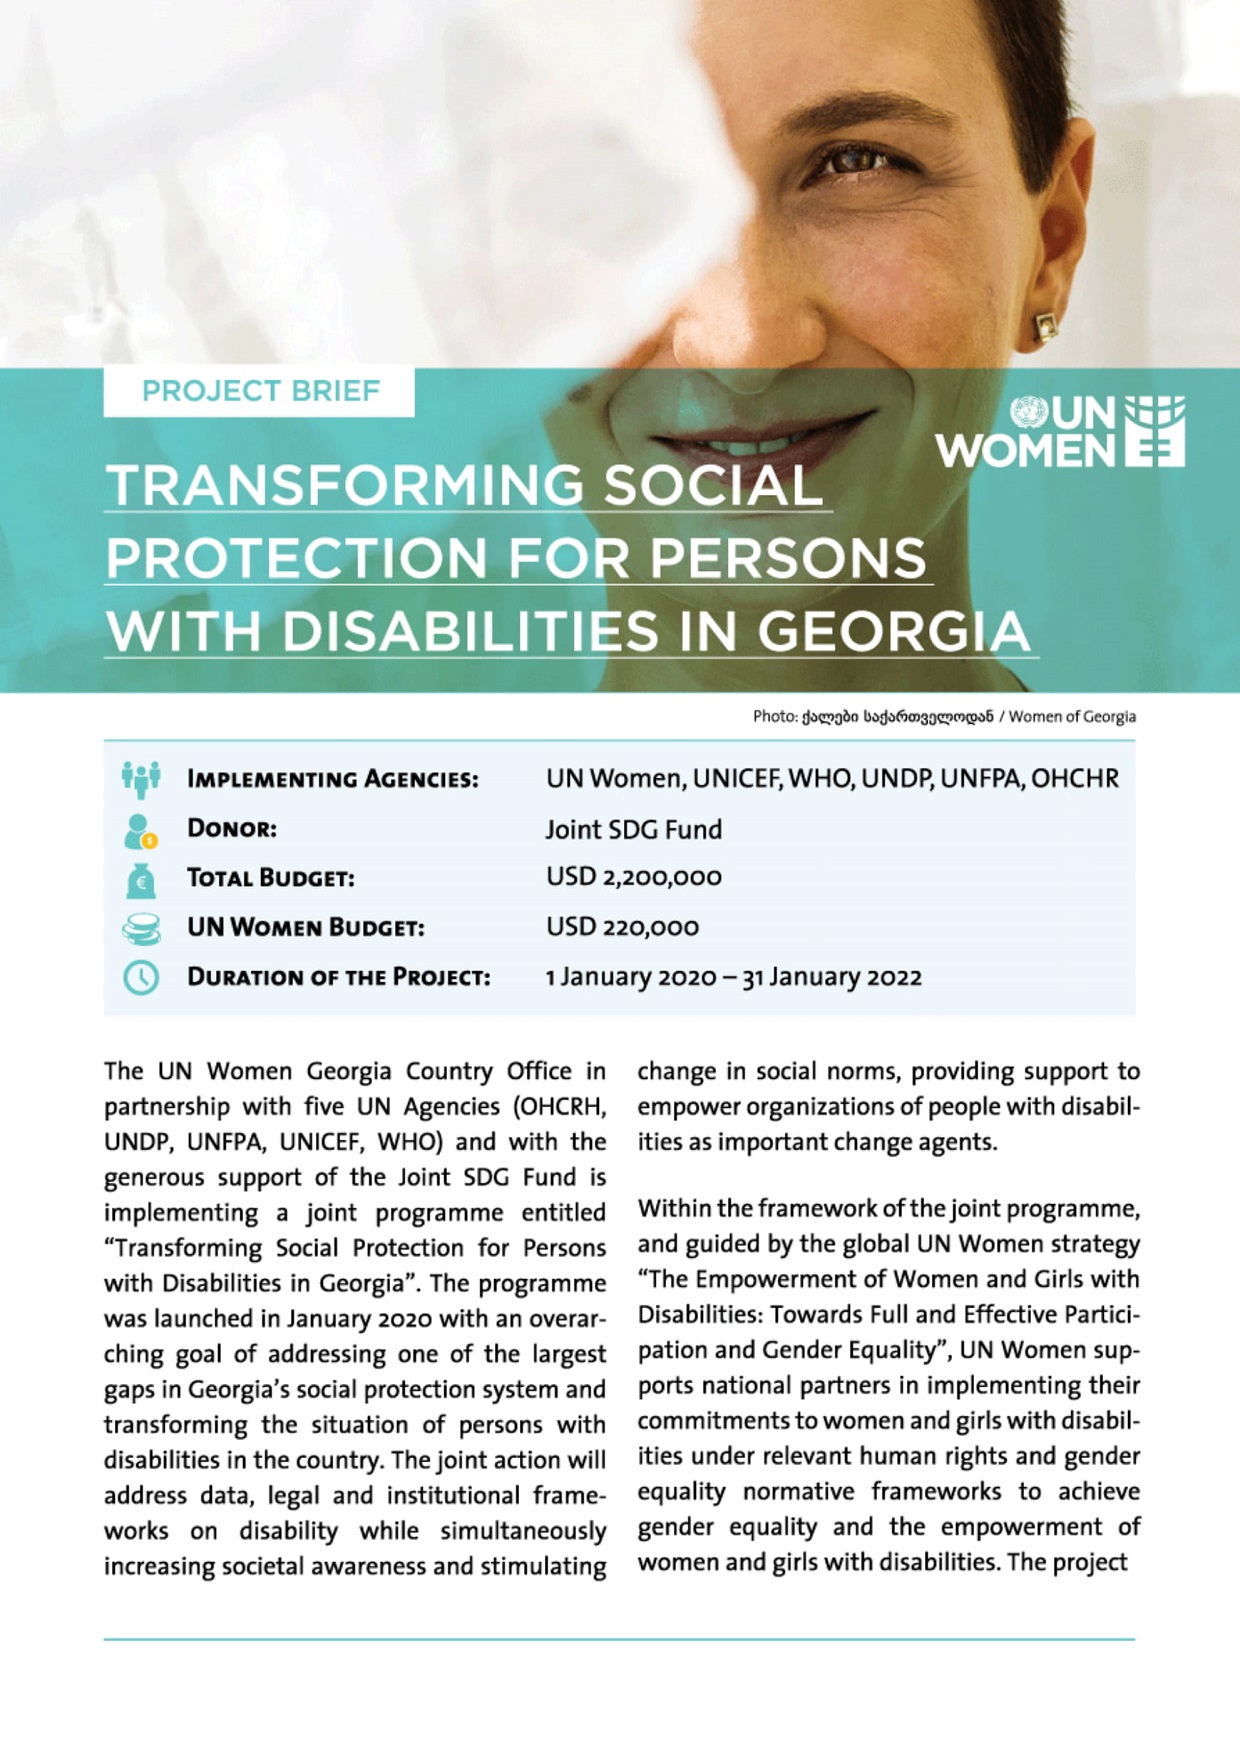 Transforming Social Protection for Persons with Disabilities in Georgia. Photo: UN Women